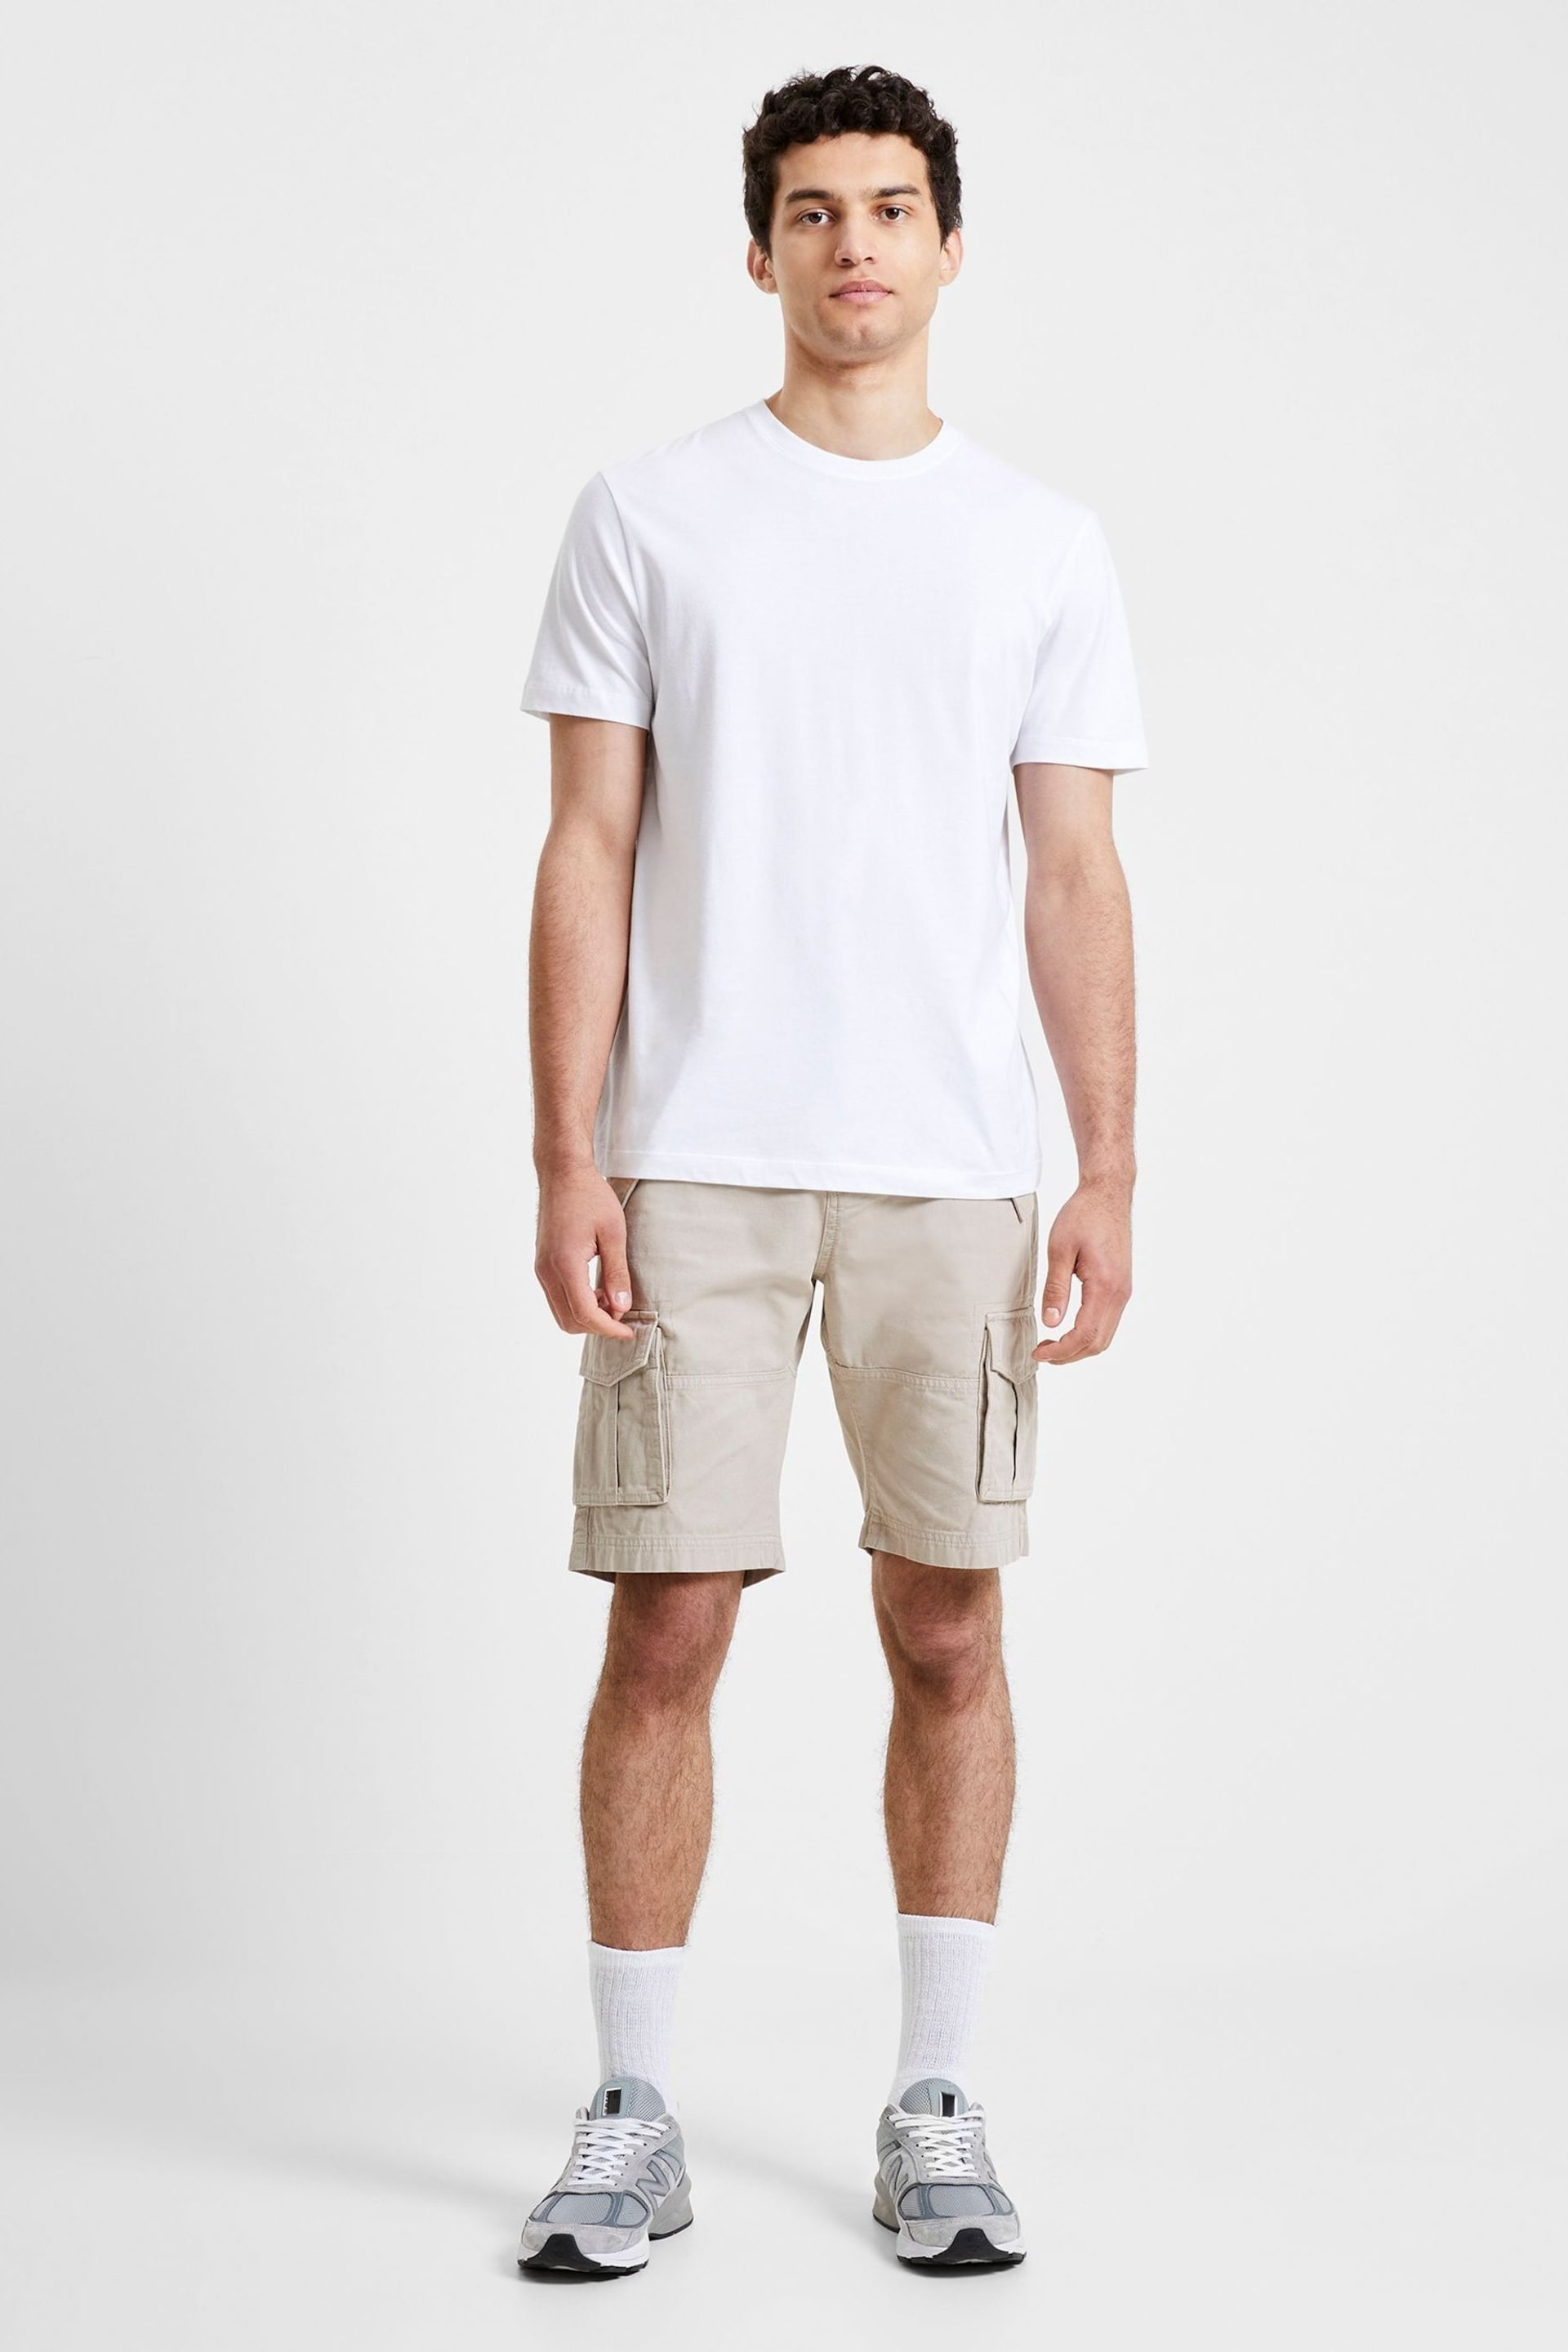 French Connection Moonstruck Cargo Shorts - Image 1 of 2